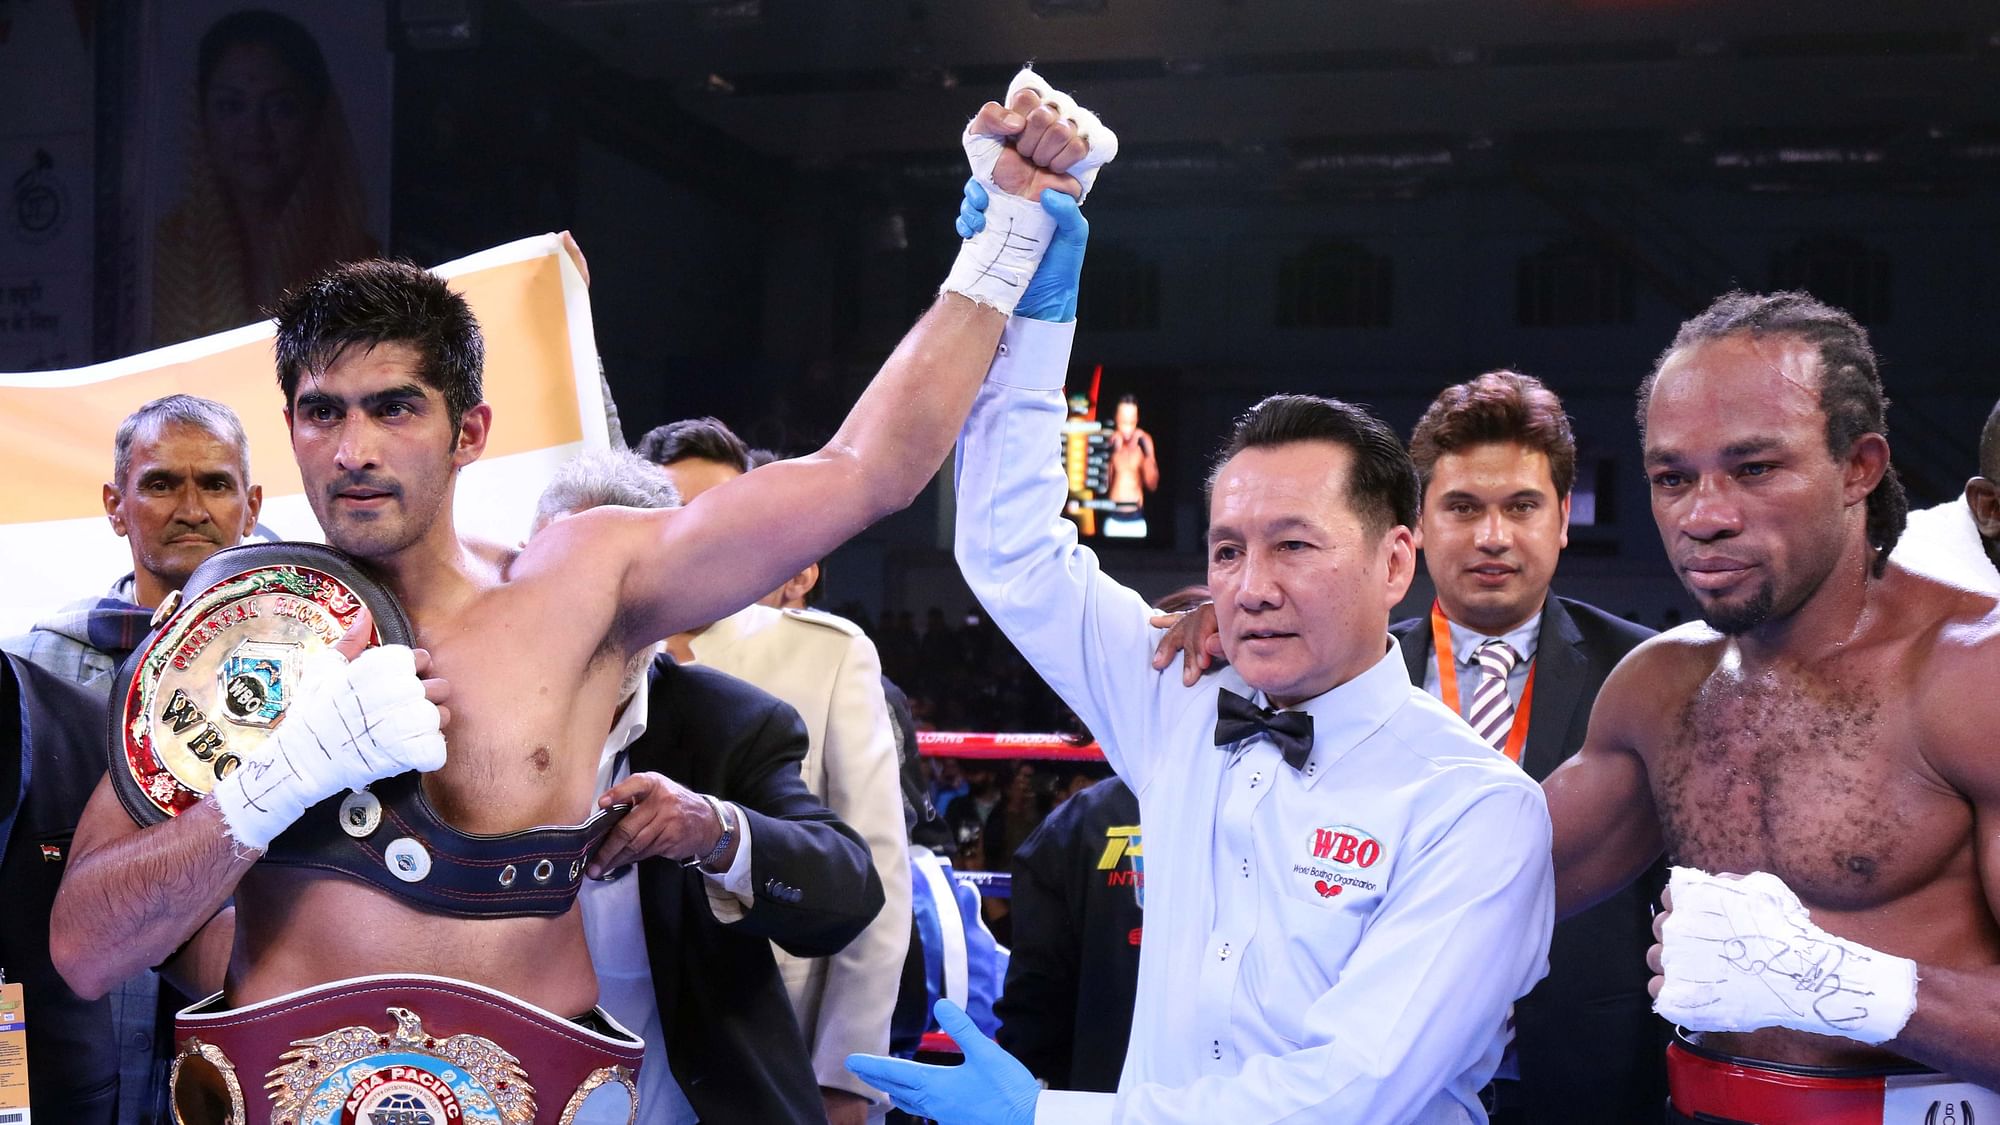 With this victory, Vijender has now won 10 pro bouts on the trot.